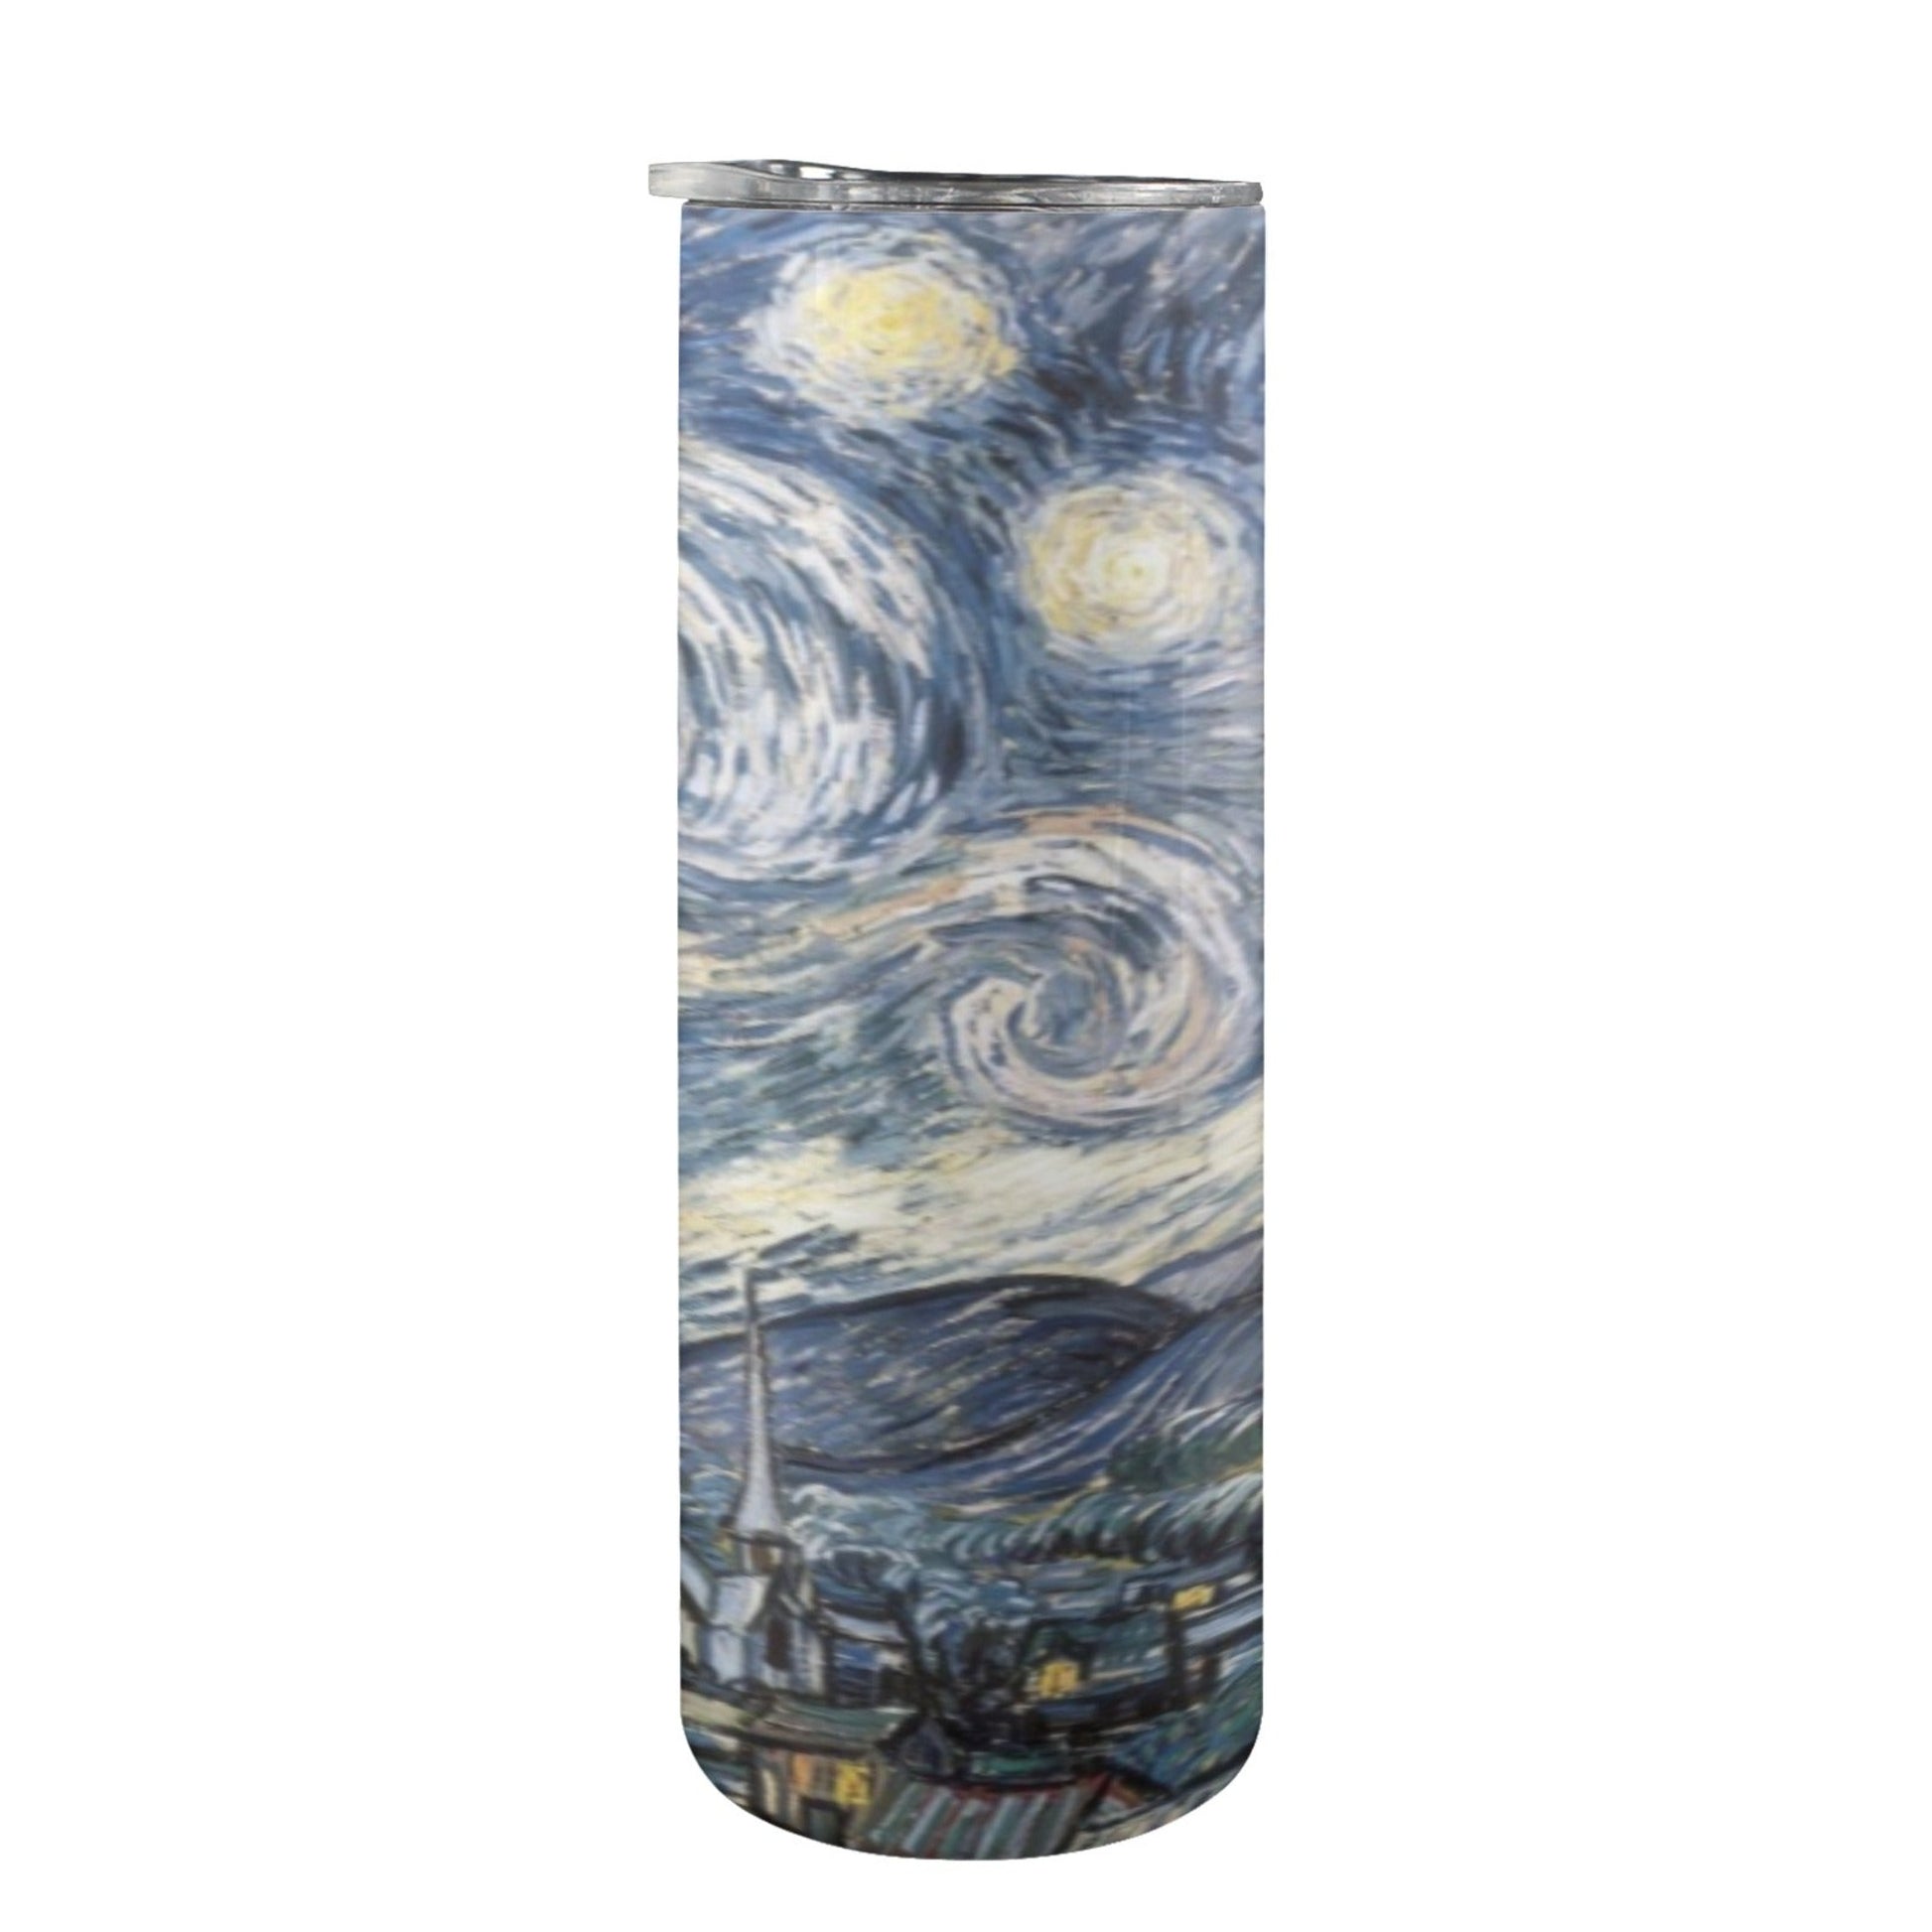 Starry Night - 20oz Tall Skinny Tumbler with Lid and Straw 20oz Tall Skinny Tumbler with Lid and Straw